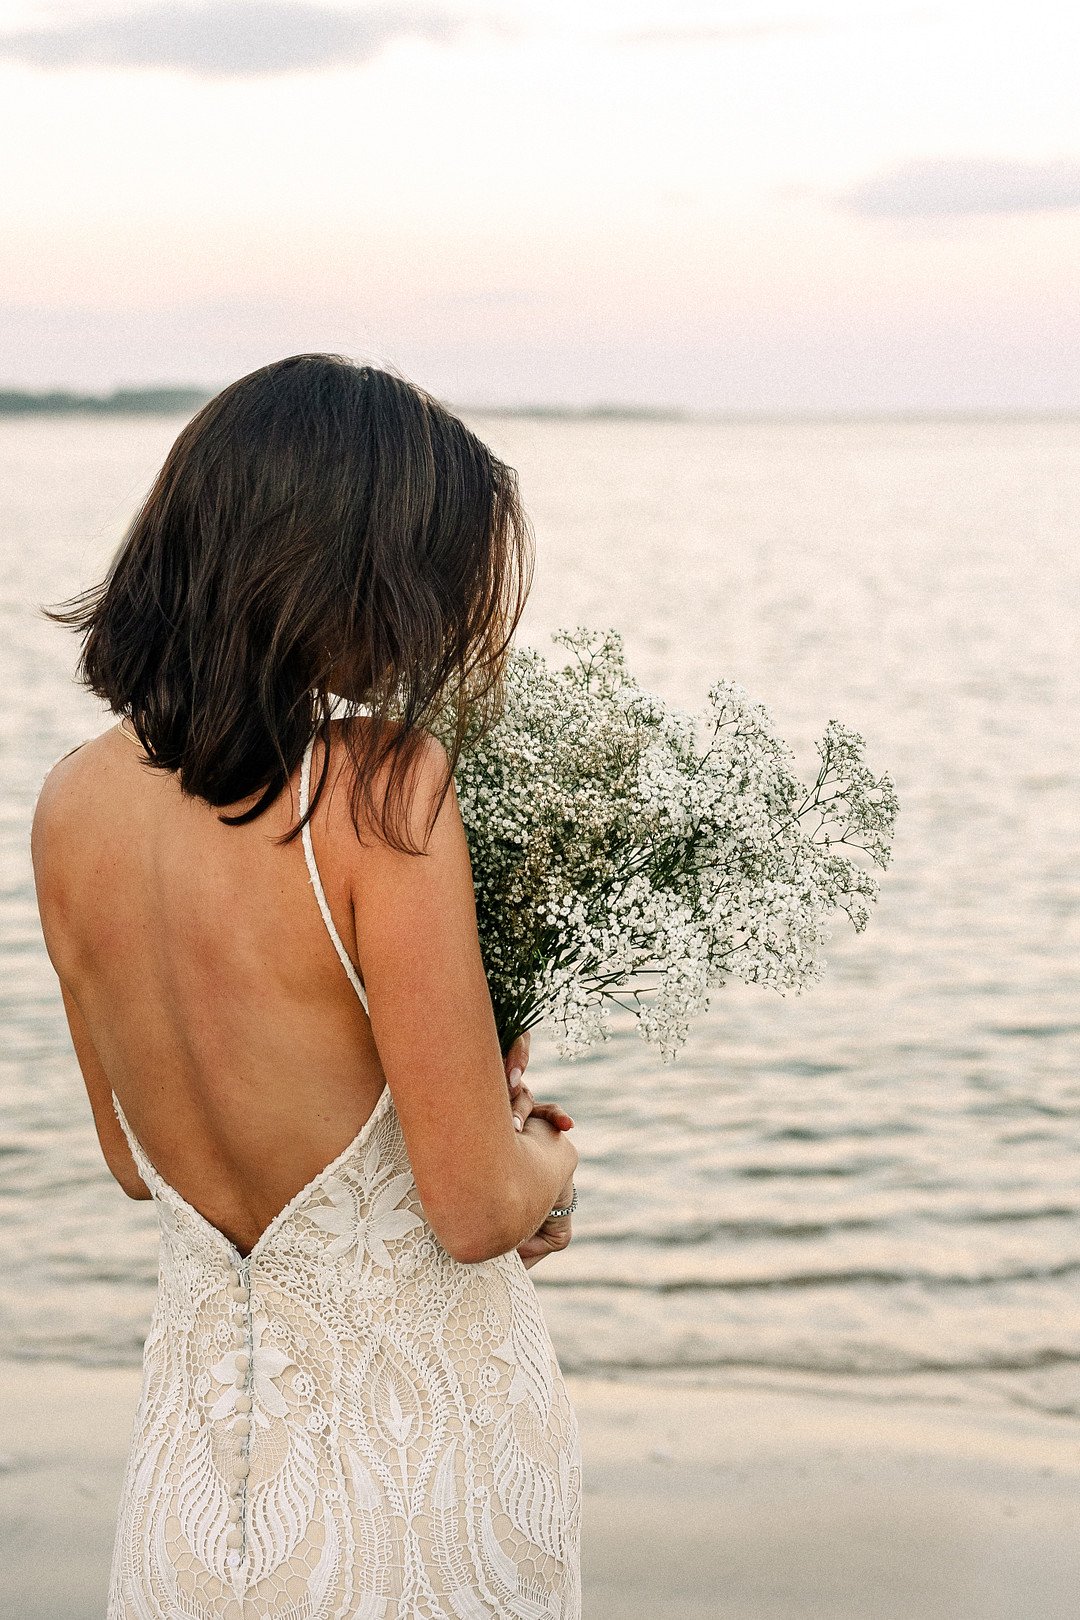 A beachy bridal moment_Carly Terry Photography_AW BRIDAL-1567_low.jpg